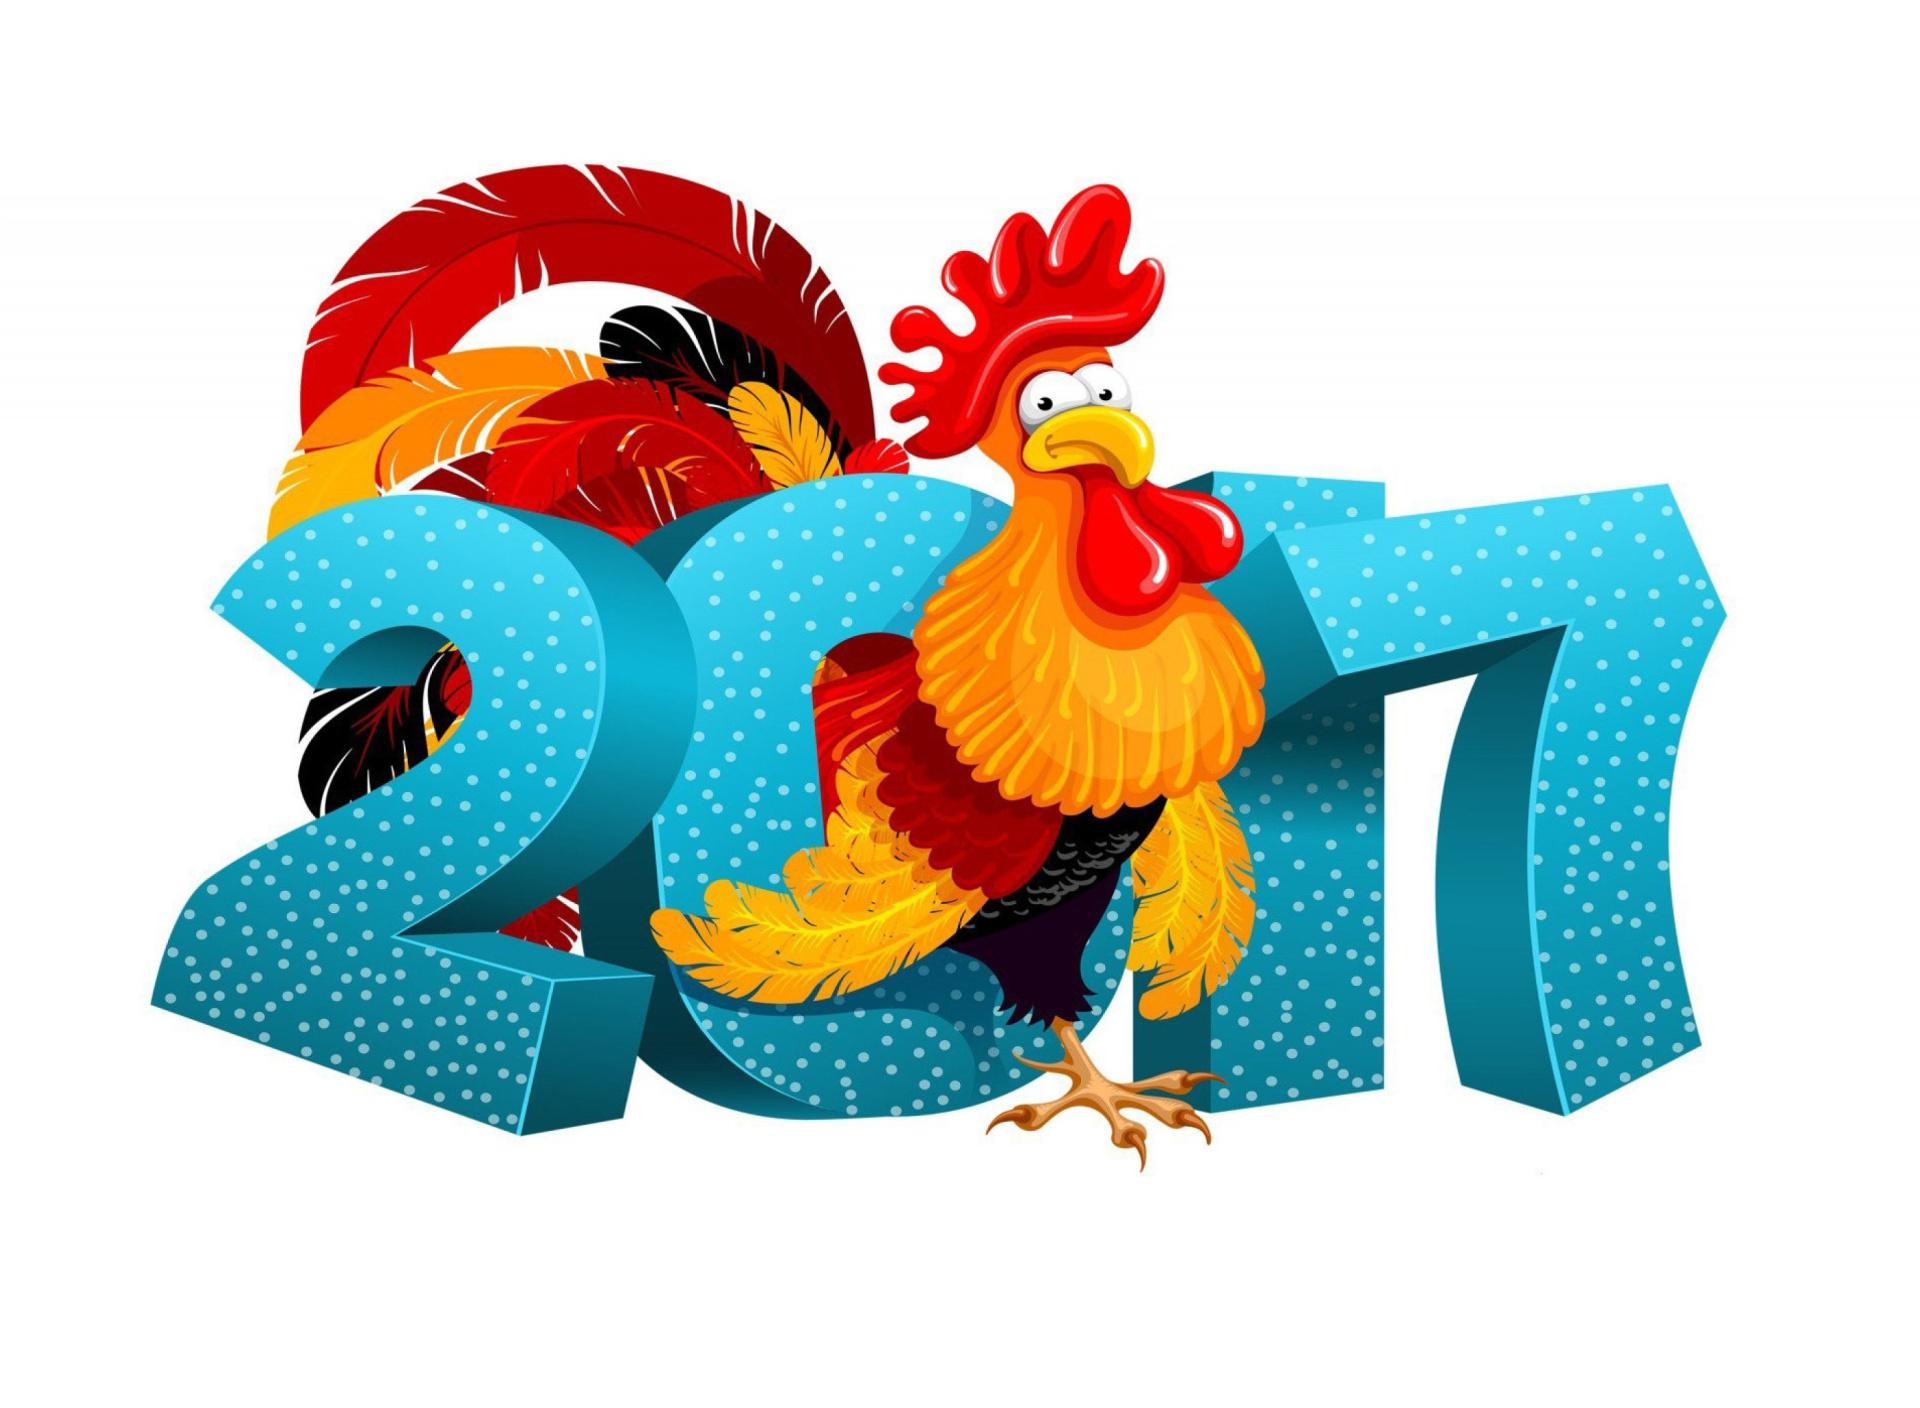 Das 2017 New Year Chinese Horoscope Red Cock Rooster Wallpaper 1920x1408